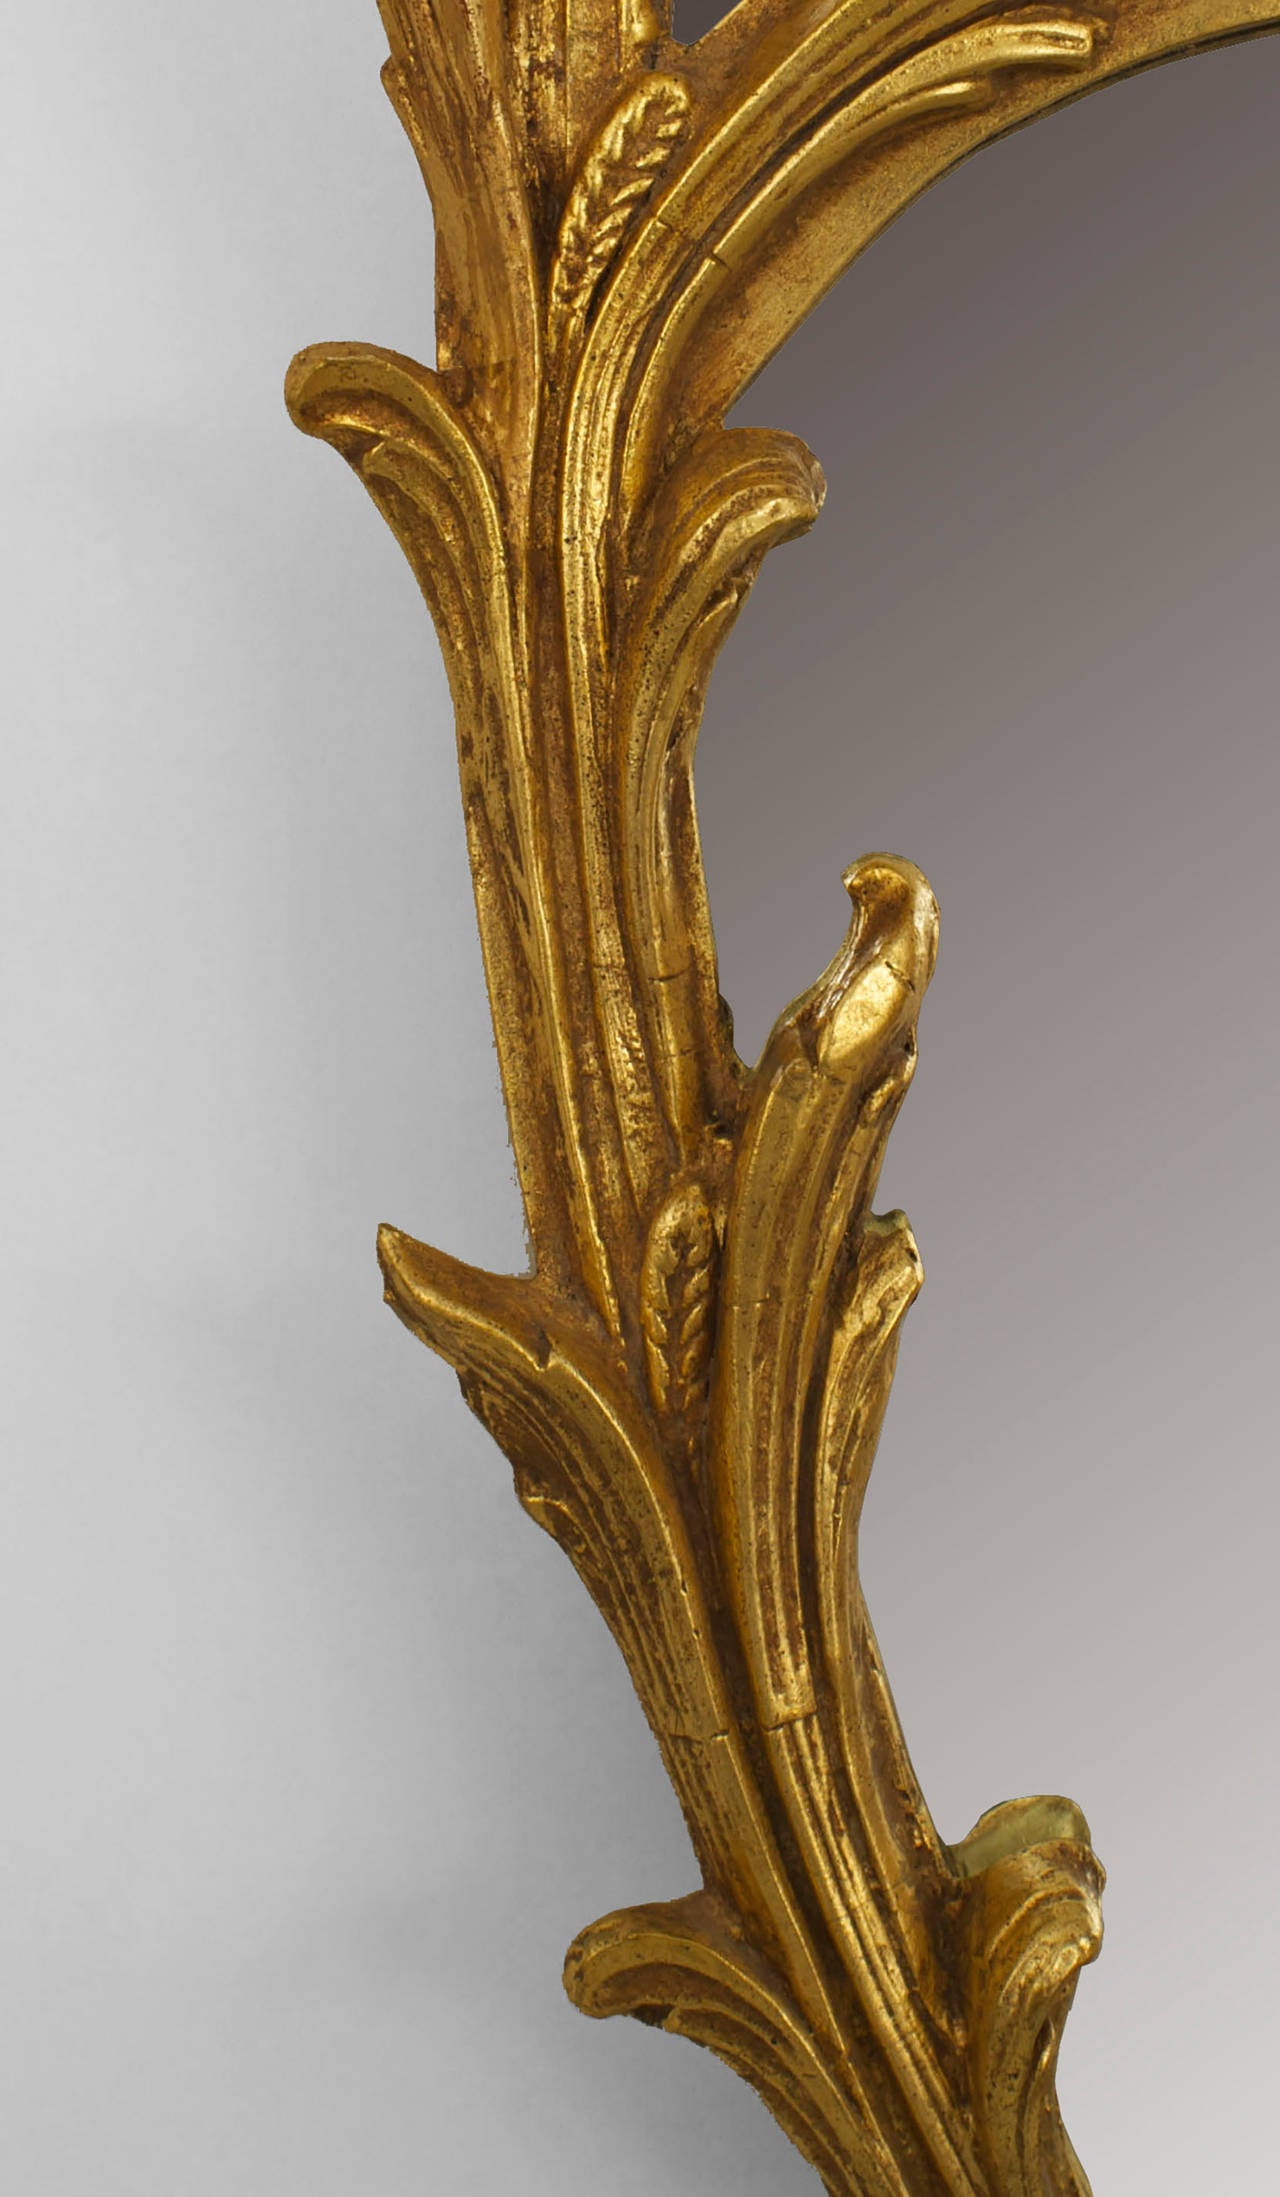 Italian Rococo-style (20th Century) oval-shaped gilt wall mirror with a leaf carved form double frame with a centered beveled mirror and a scroll pediment top.
